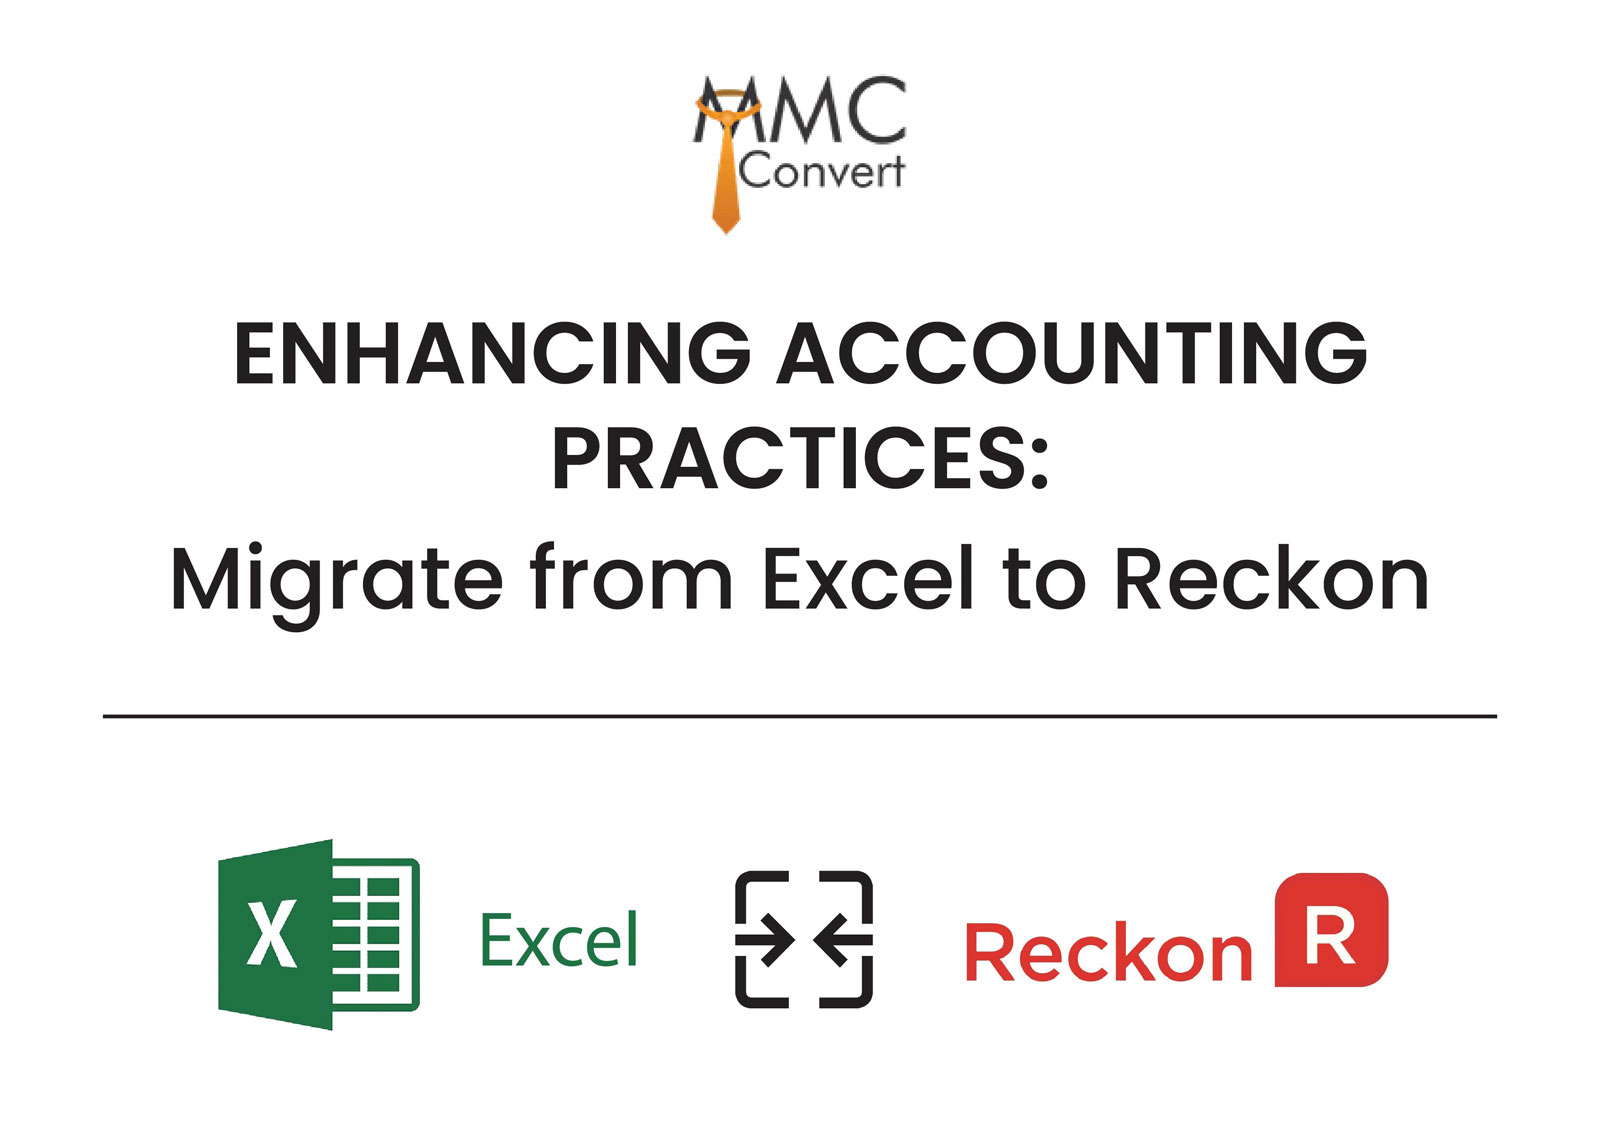 Enhancing Accounting Practices: Migrate from Excel to Reckon